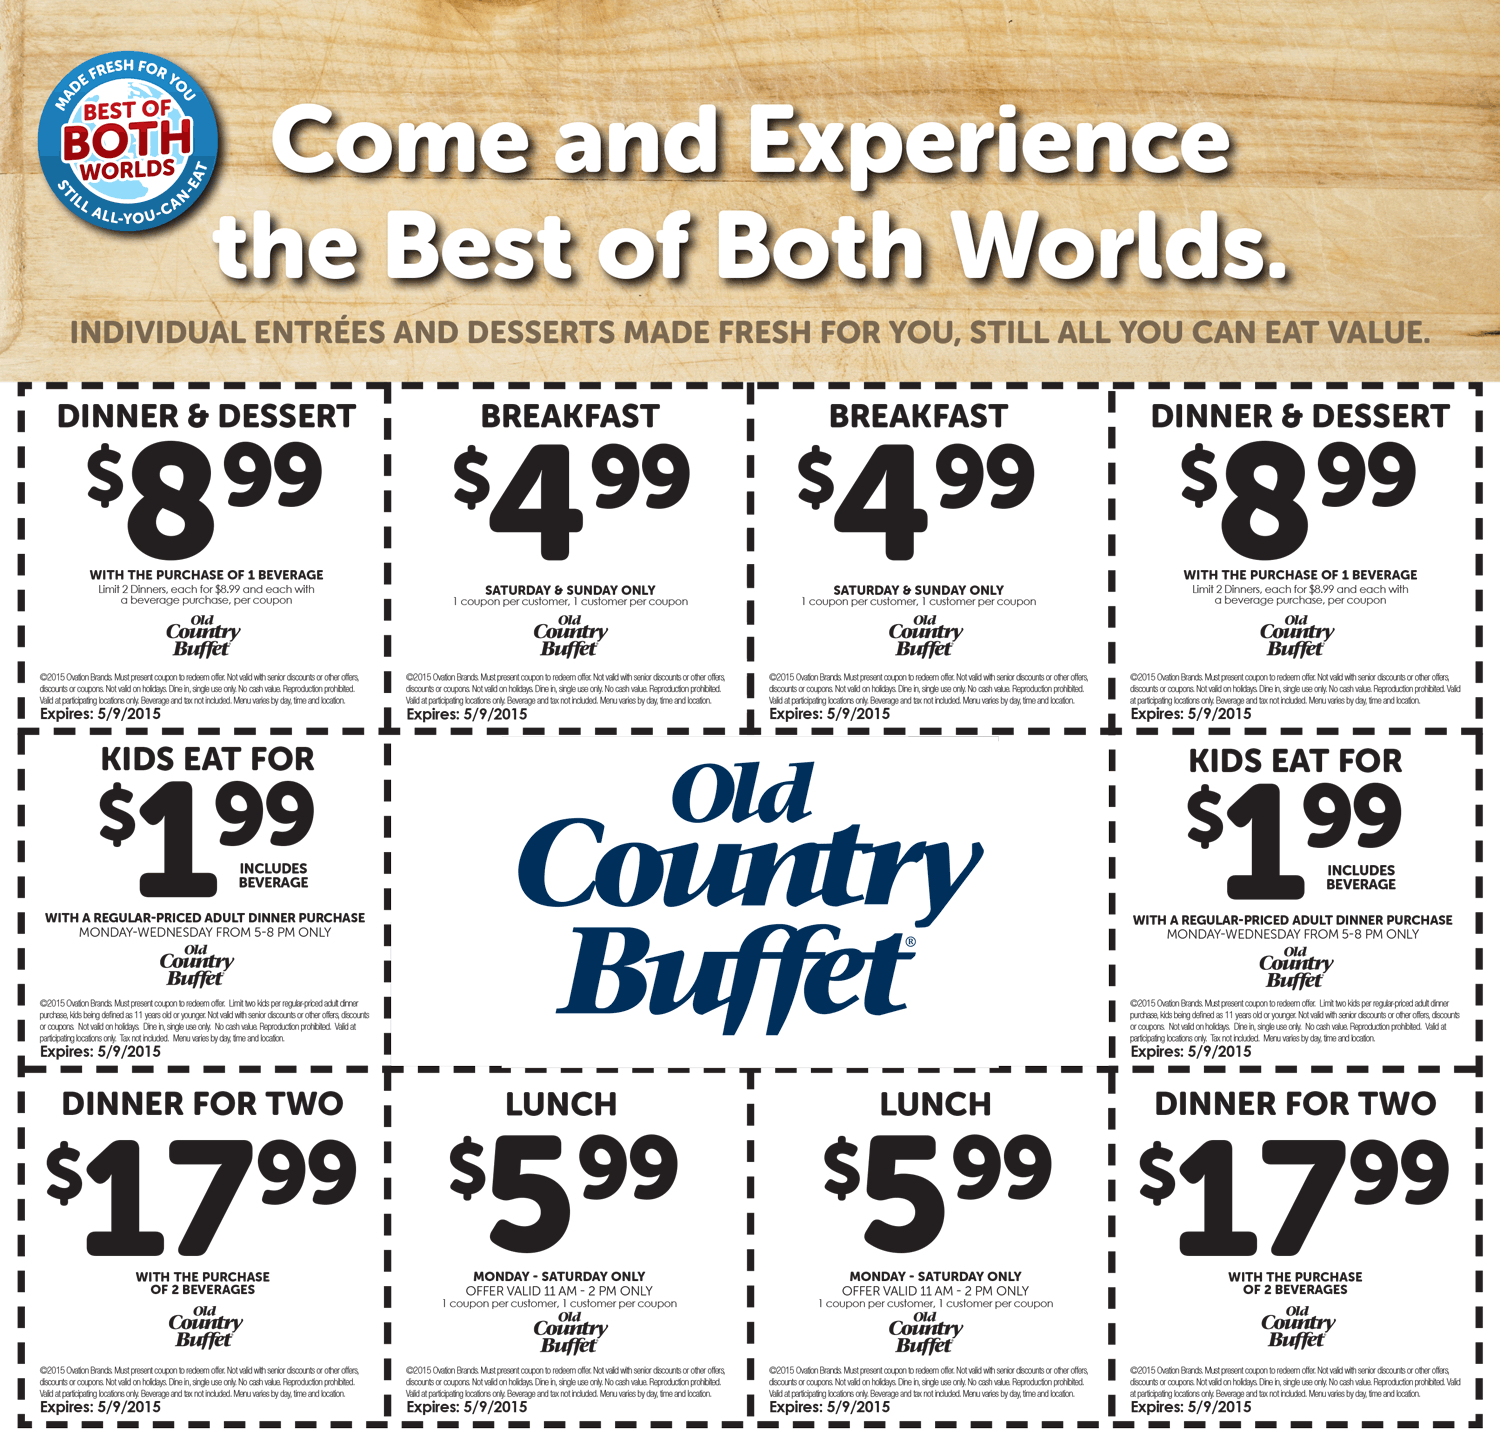 Old Country Buffet Coupons - $2 Kids, $5 Breakfast, $6 Lunch &amp;amp; More - Old Country Buffet Printable Coupons Buy One Get One Free